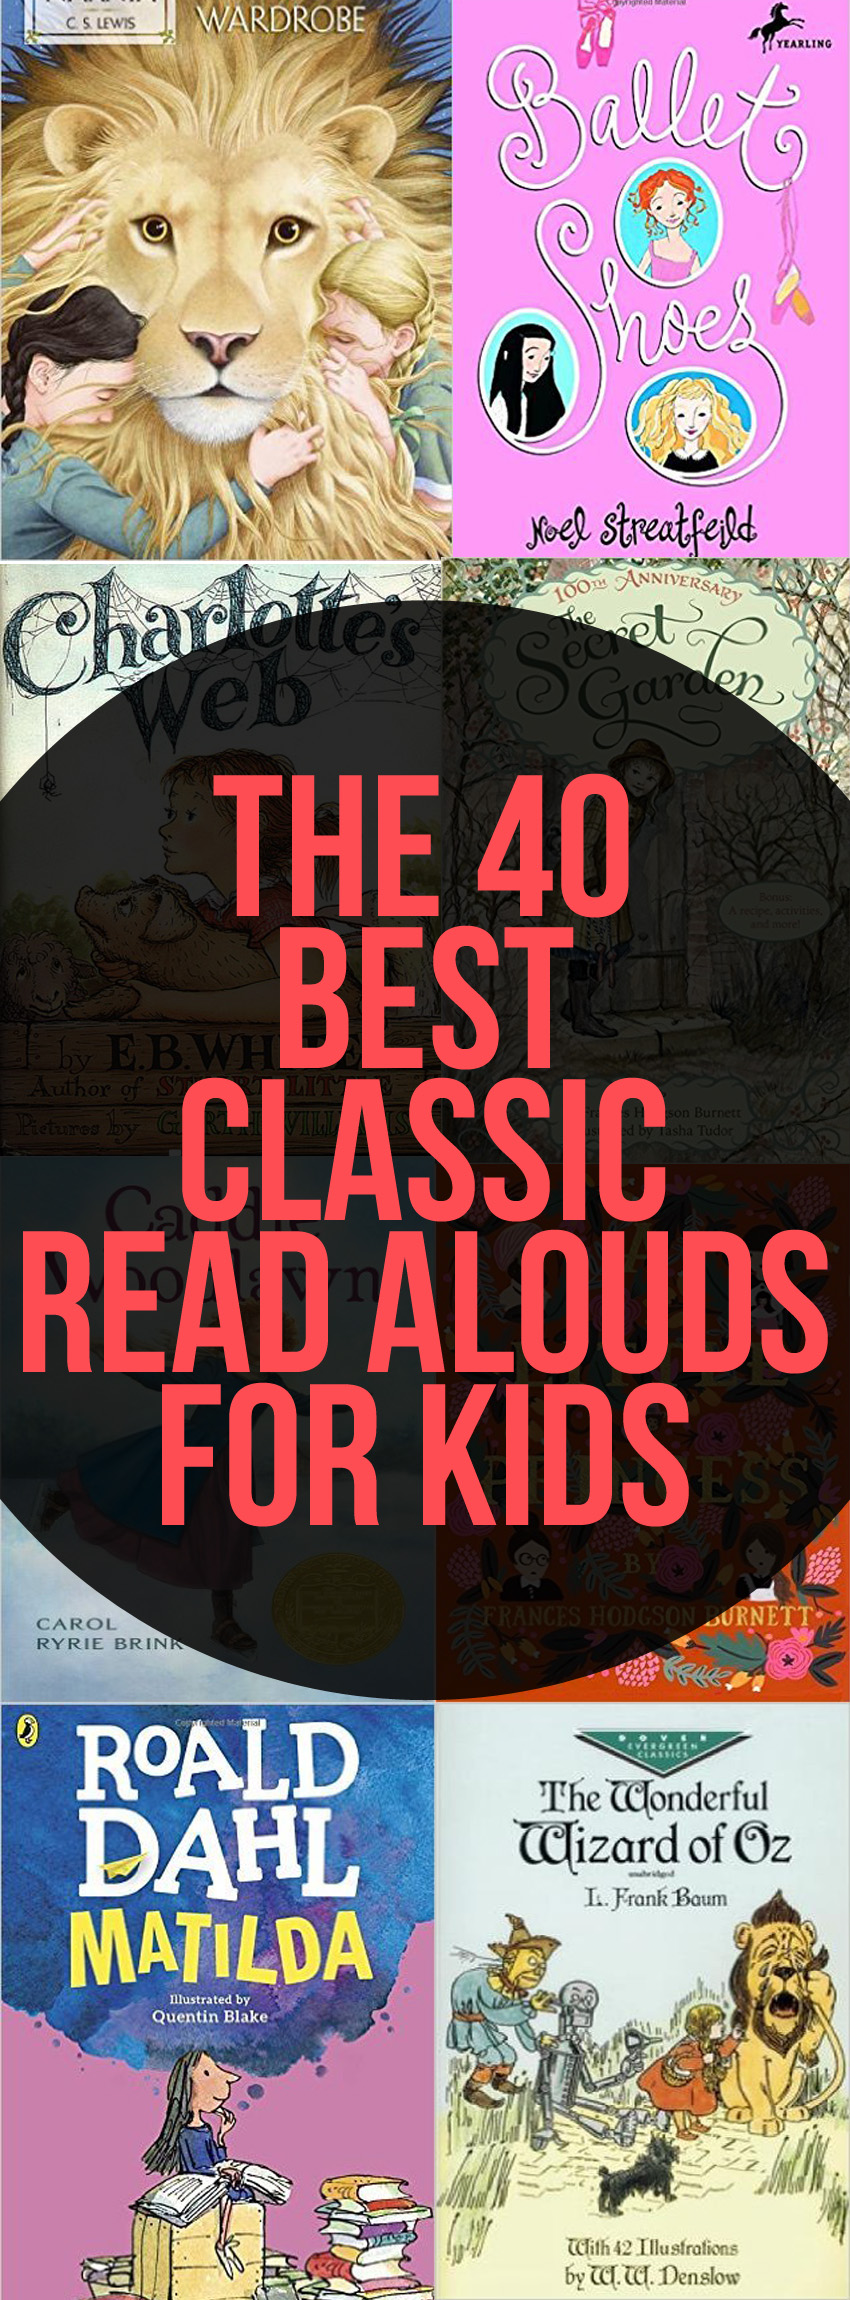 The 40 Best Classic Read Alouds for Kids